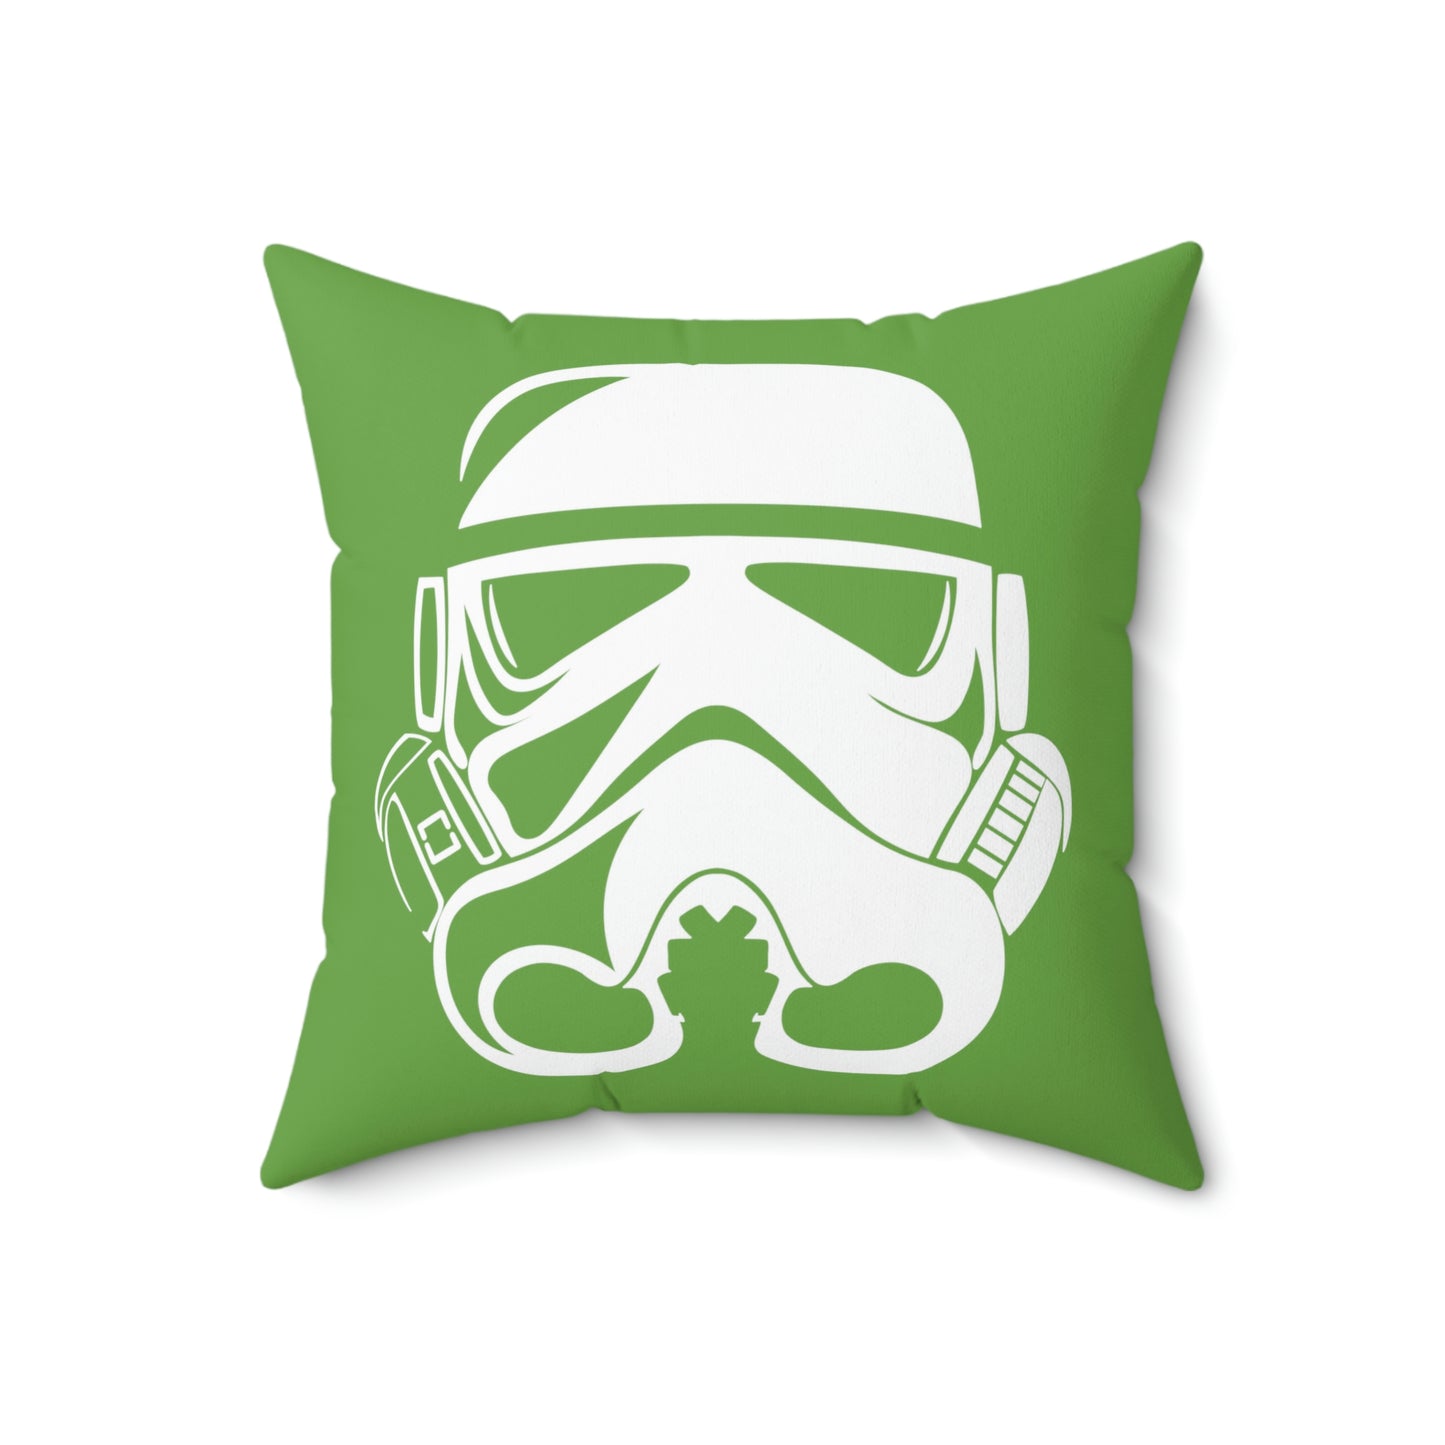 Spun Polyester Square Pillow Case “Storm Trooper White on Green”